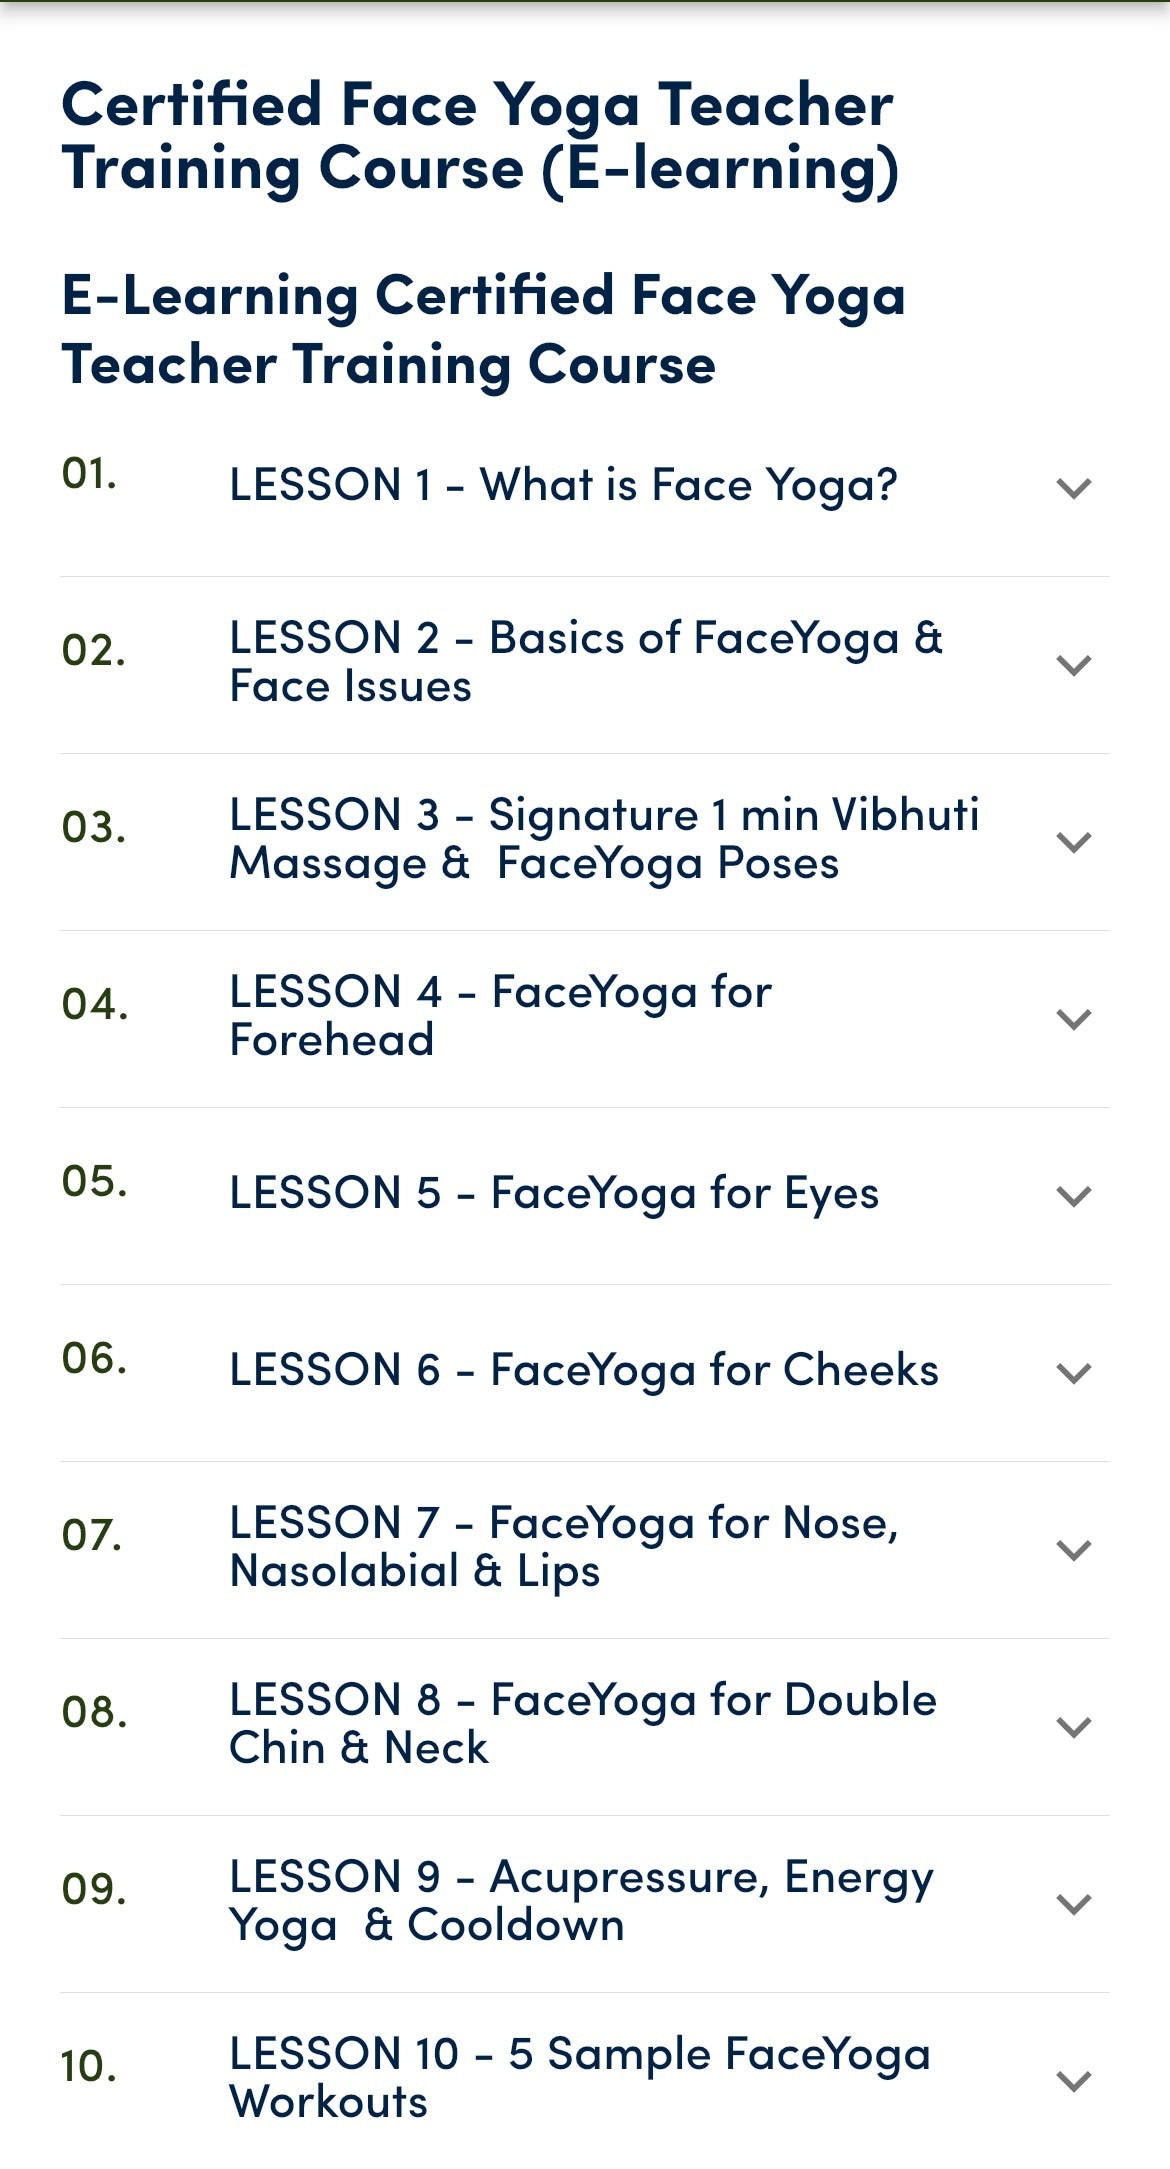 Buy certified face yoga teacher training course at amazing deals